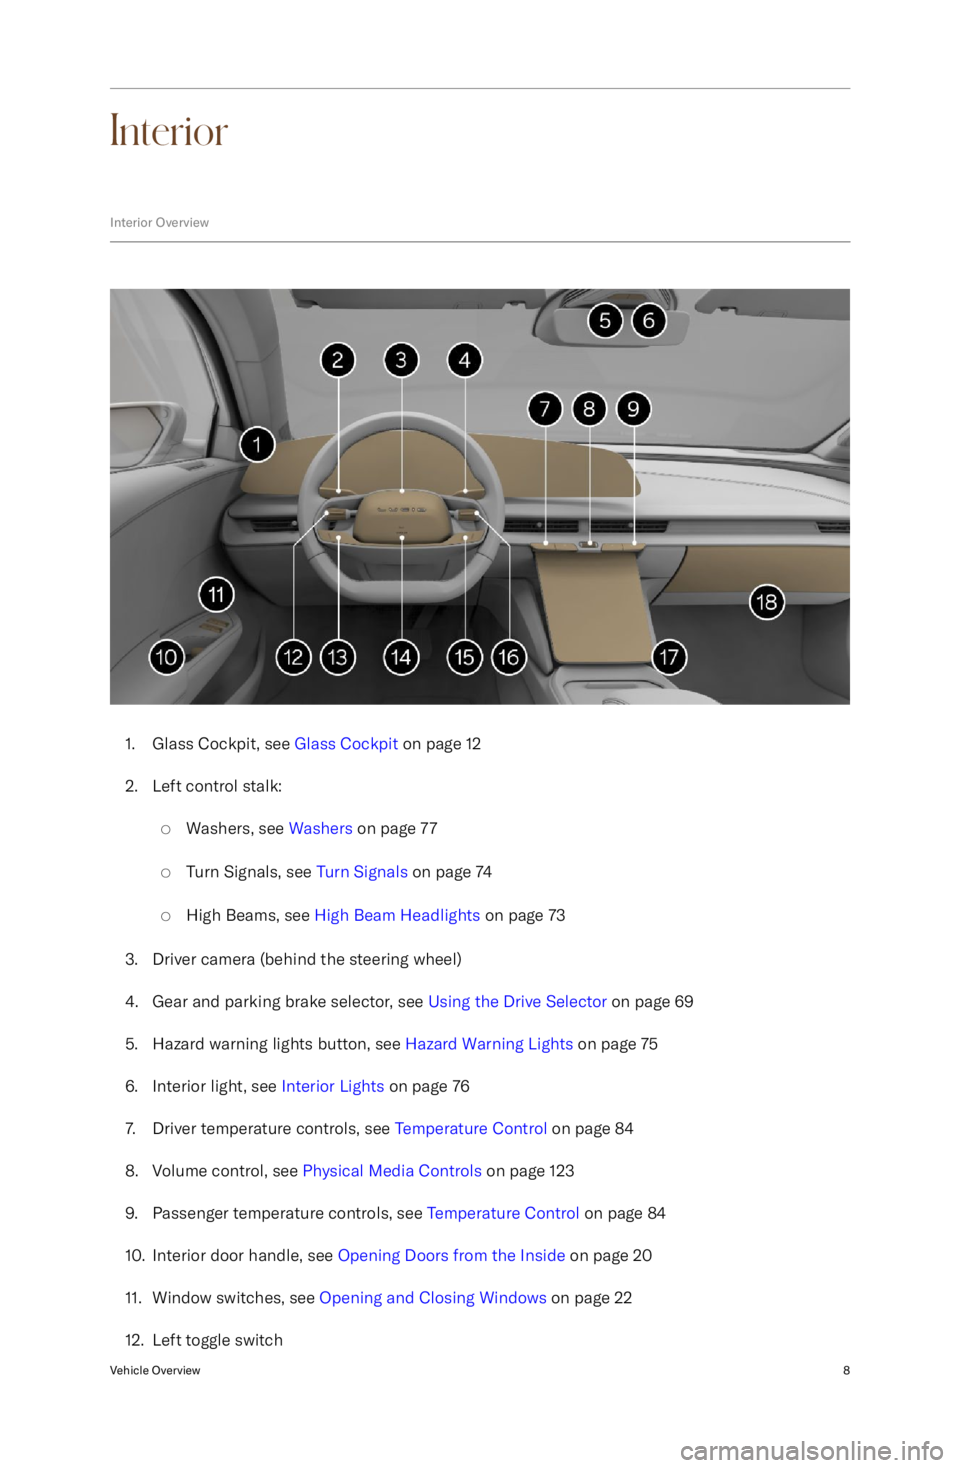 LUCID AIR 2023 Owners Manual Interior
Interior Overview
1. Glass Cockpit, see Glass Cockpit on page 12
2. Left control stalk: 